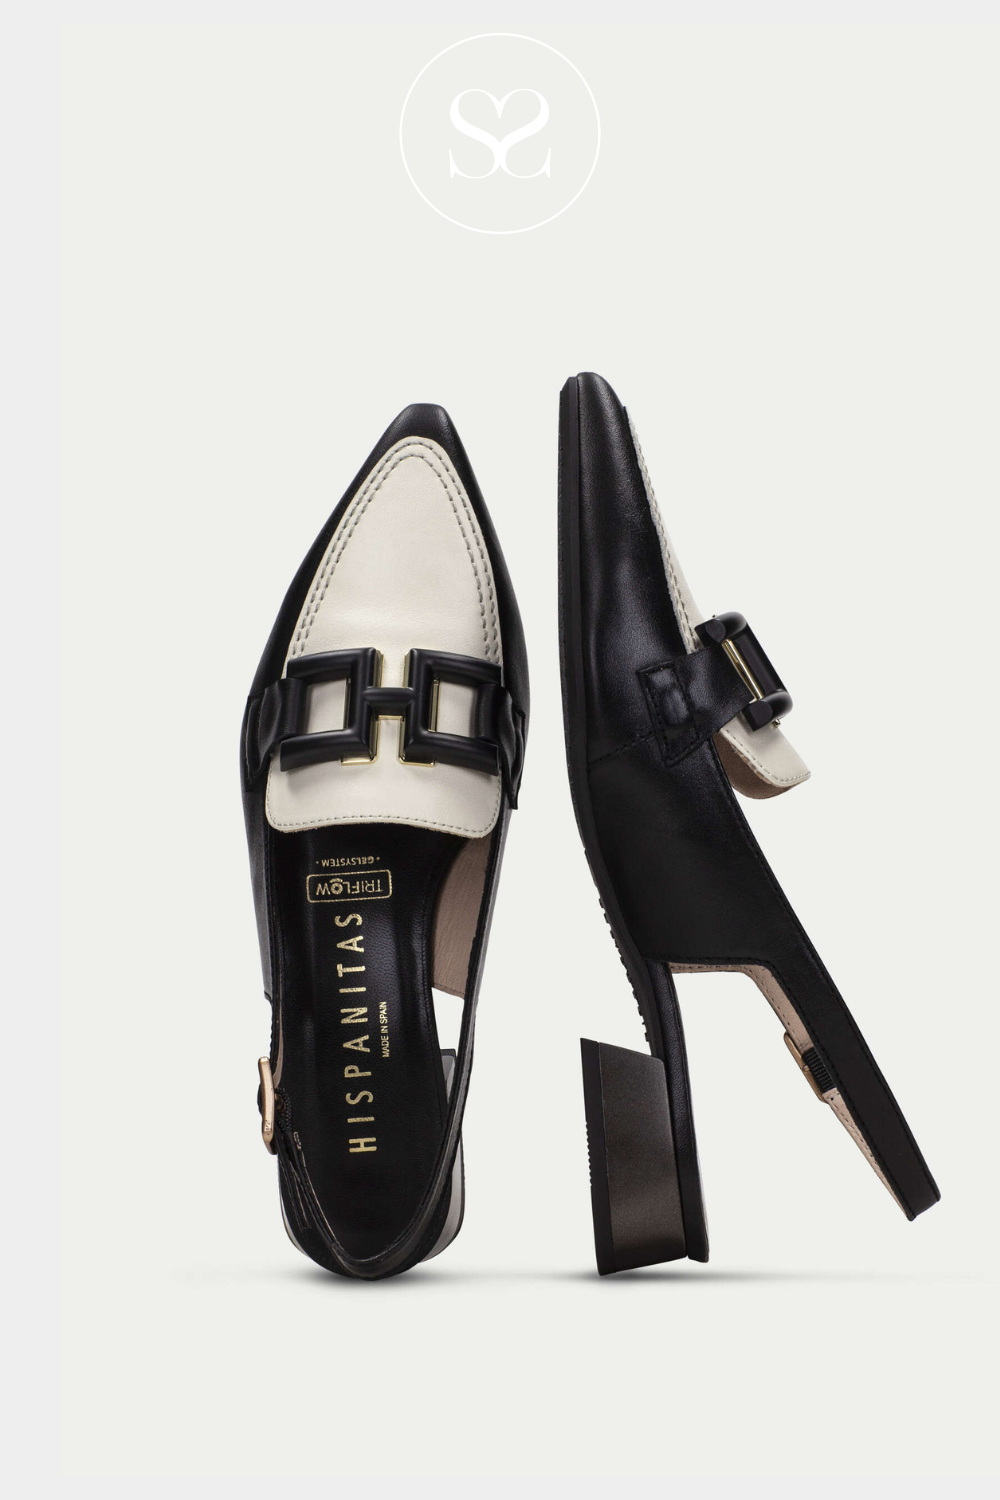 HISPANITAS HV243299 BLACK CREAM SLINGBACK LOAFERS WITH ADJUSTABLE BUCKLE AND SQUARE CHAIN DETAIL FEATURE ACROSS WIDTH OF FOOT. POINTED TOE